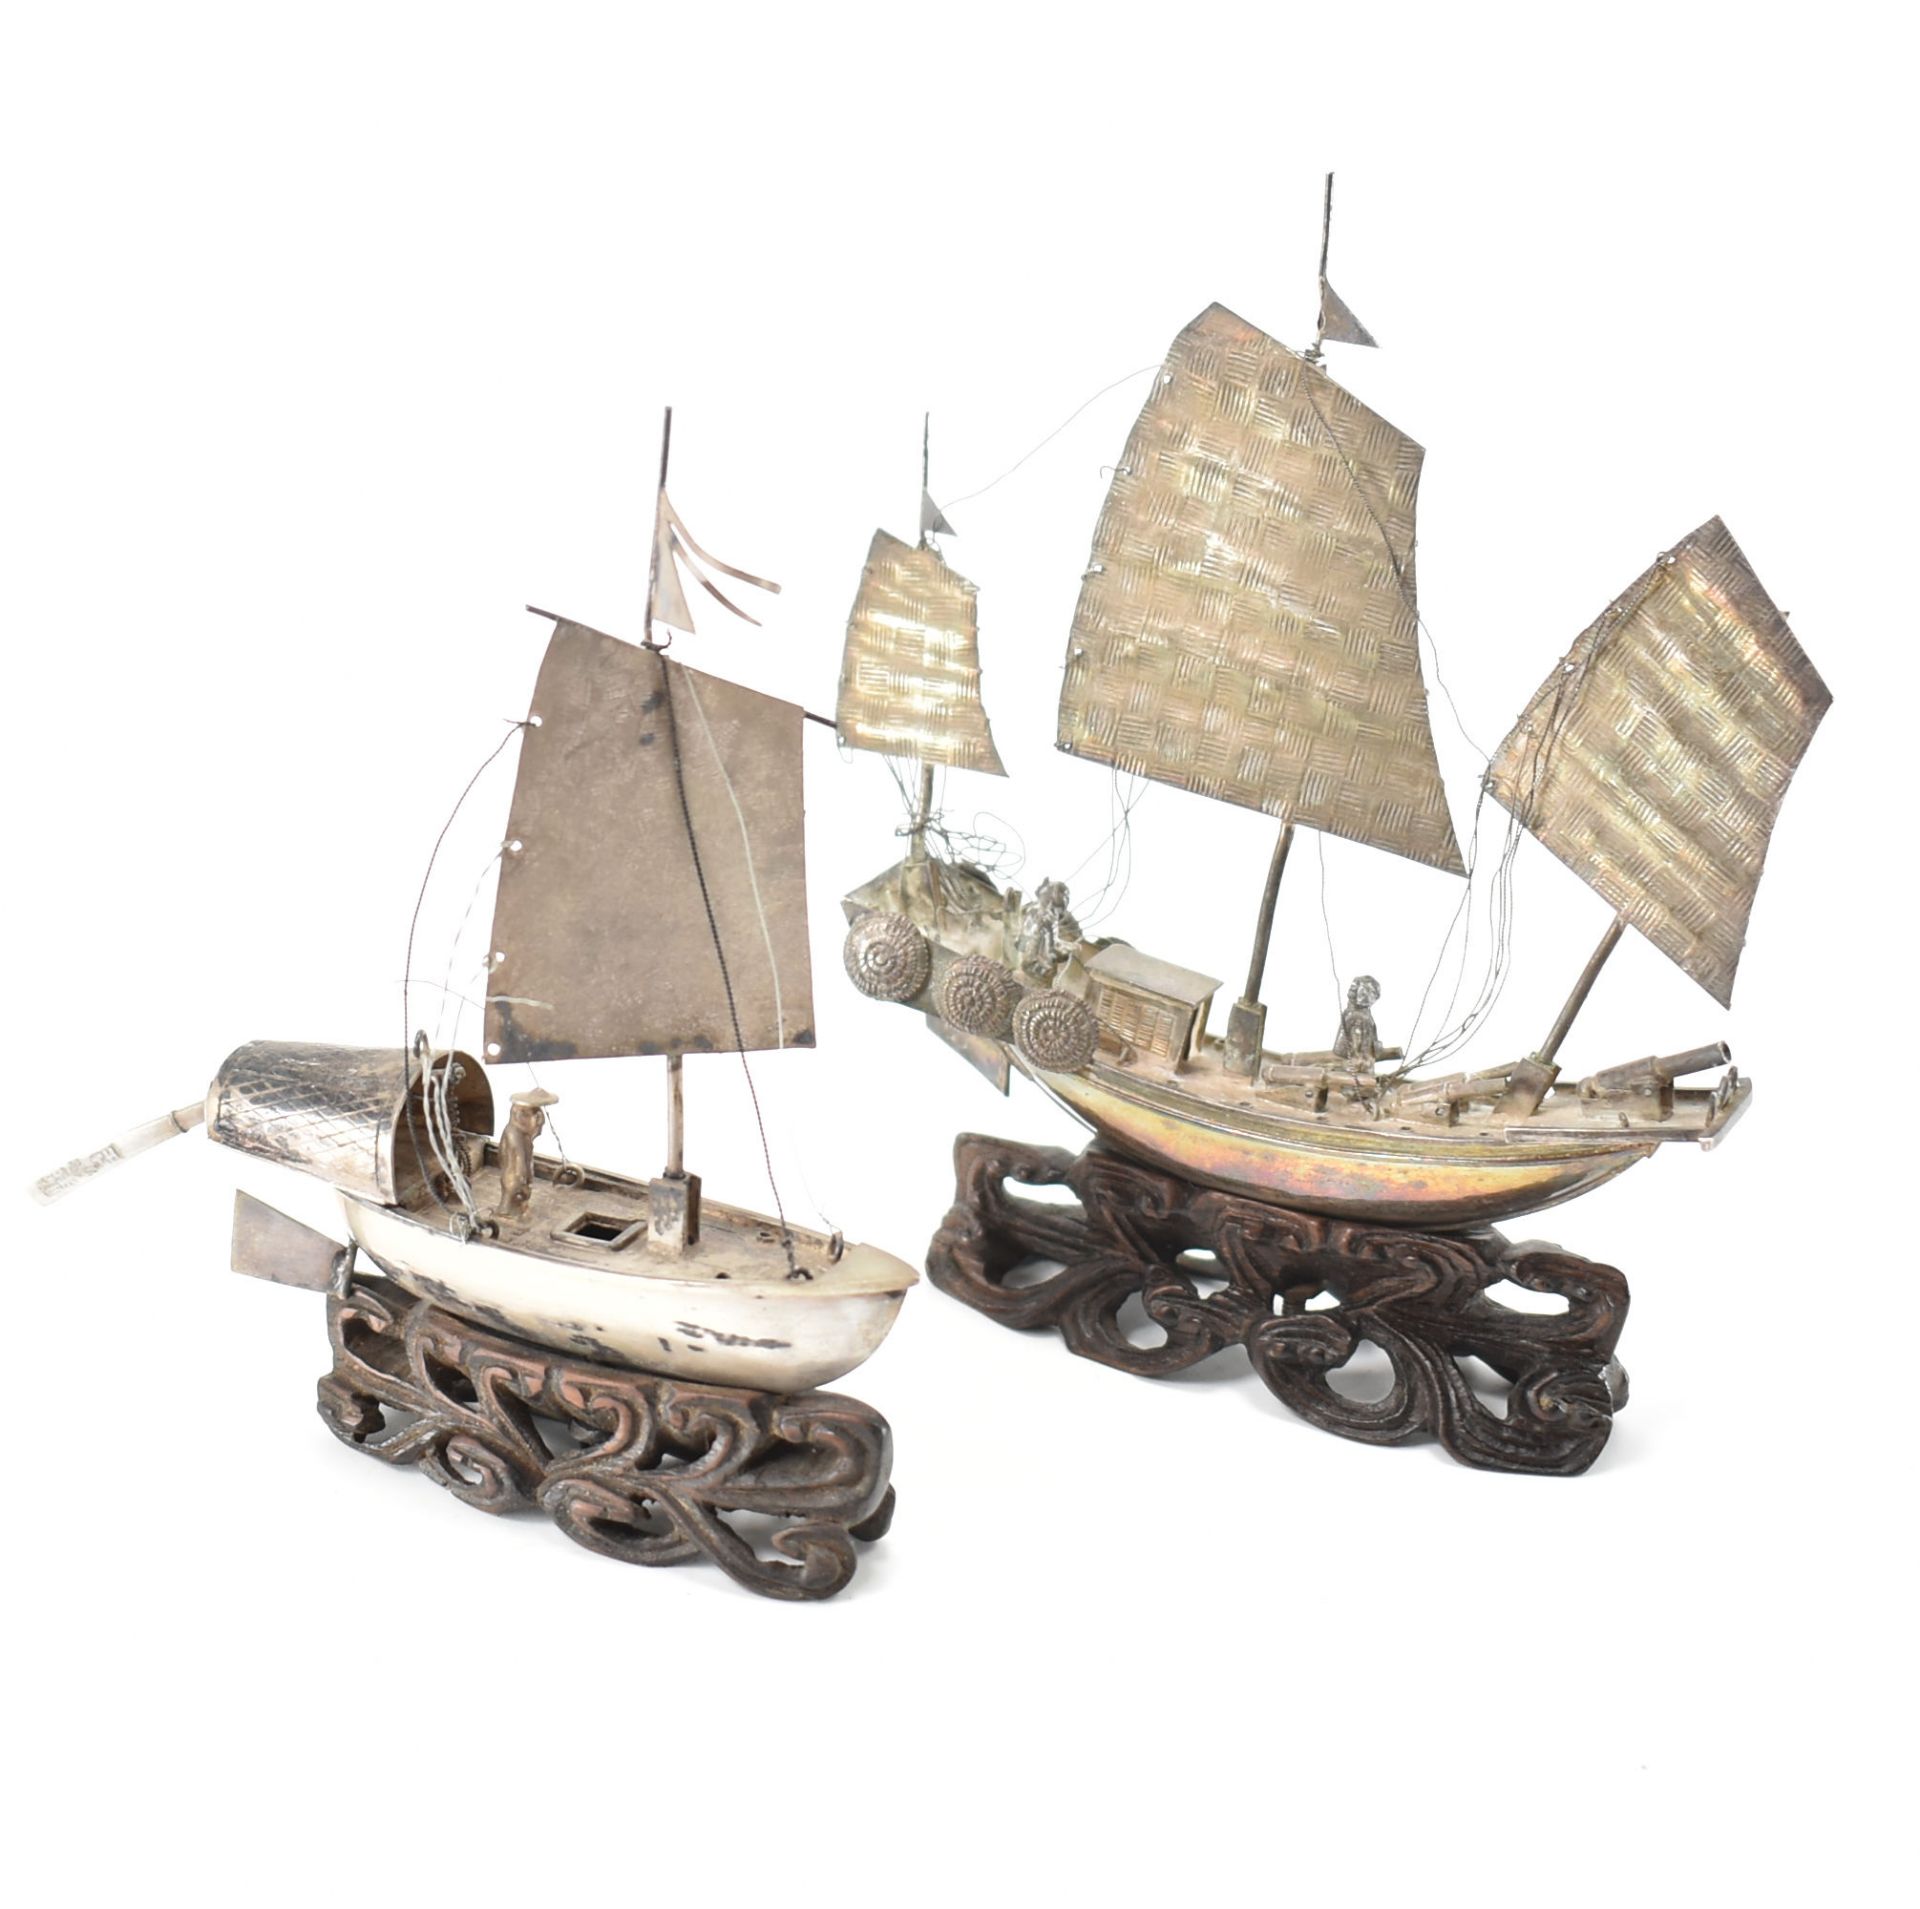 PAIR OF CHINESE SILVER JUNK SHIP FIGURINES